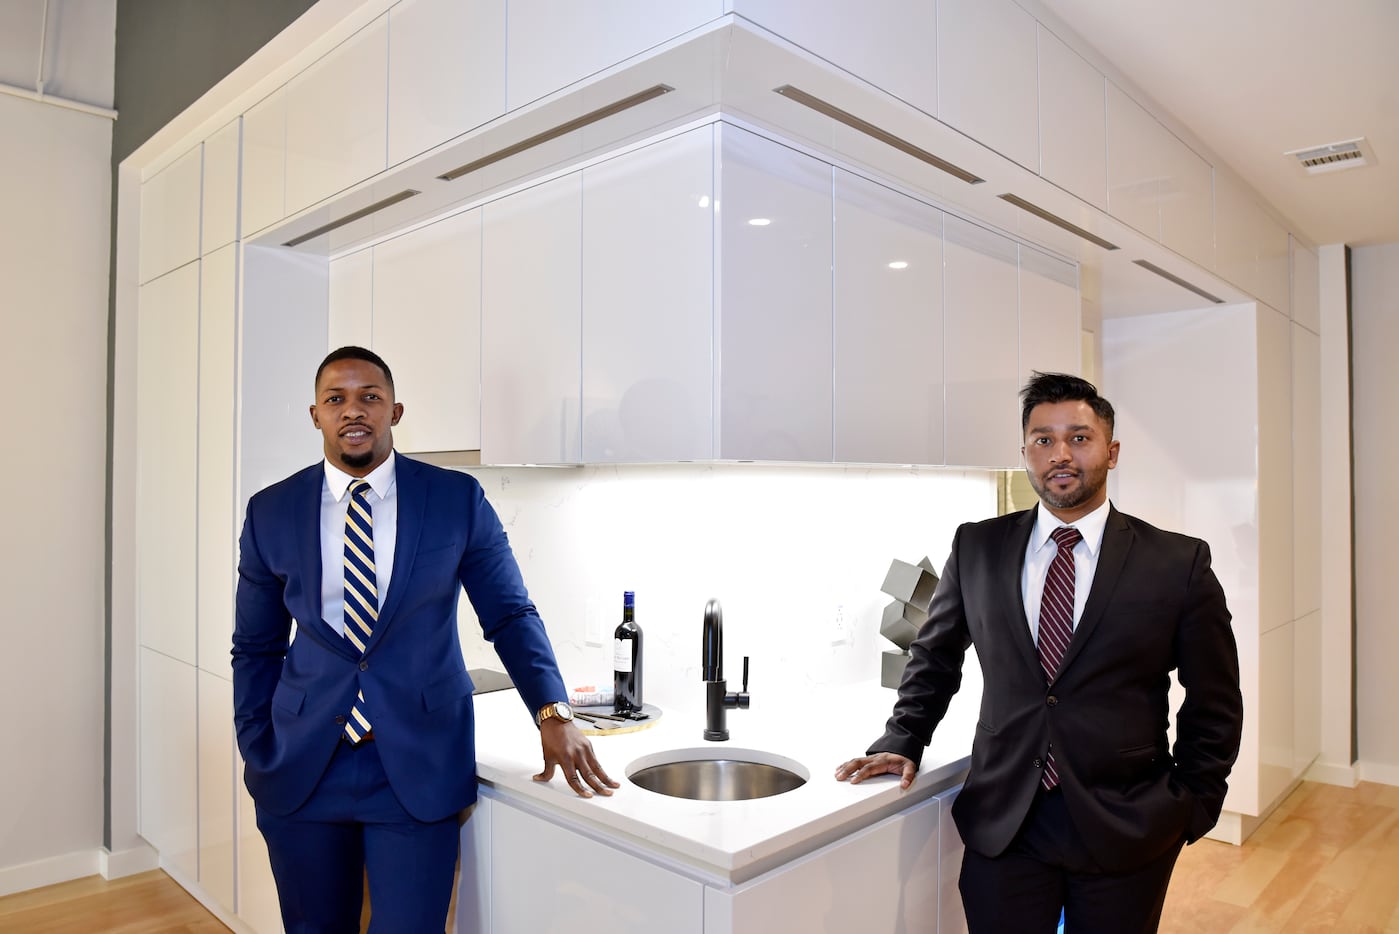 Developers Ike Bams (left) and John Williams of Bluelofts shown with an assembled kitchen...